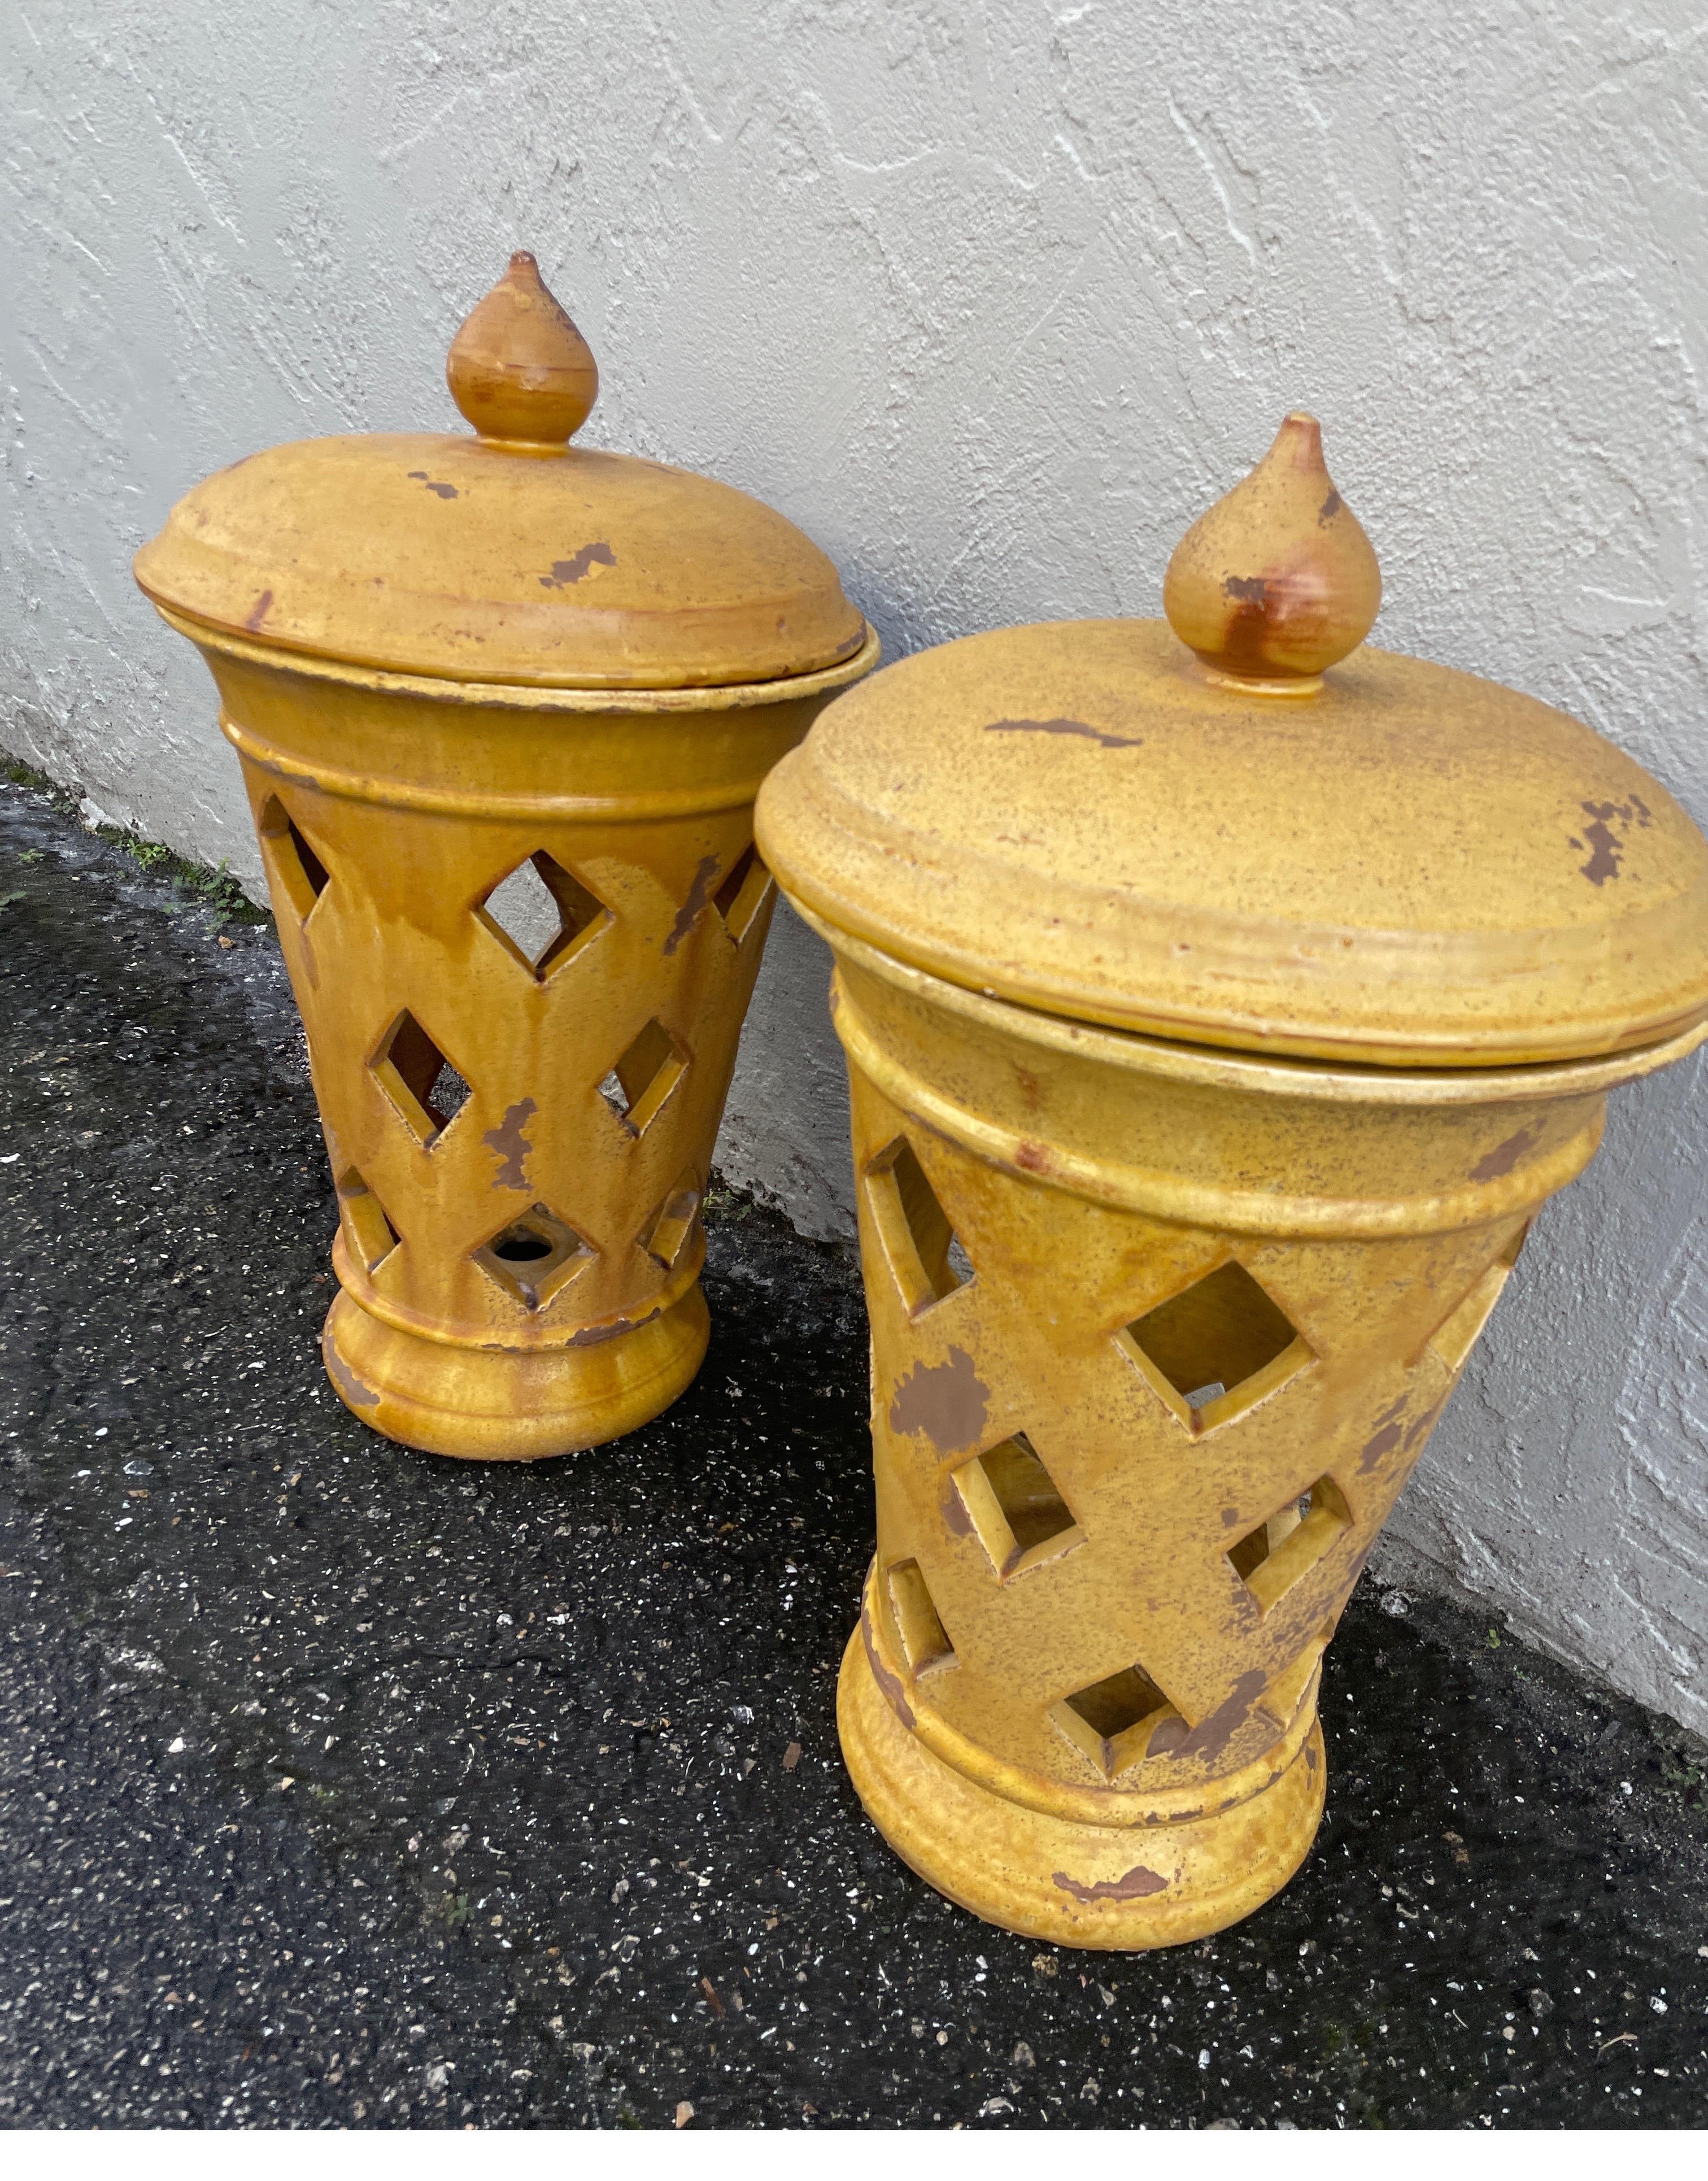 This pair of glazed terra cotta table lanterns can be used as is or easily adapted to electricity. They are stamped inside with the makers mark. Quite striking in any garden setting, loggia or family room.